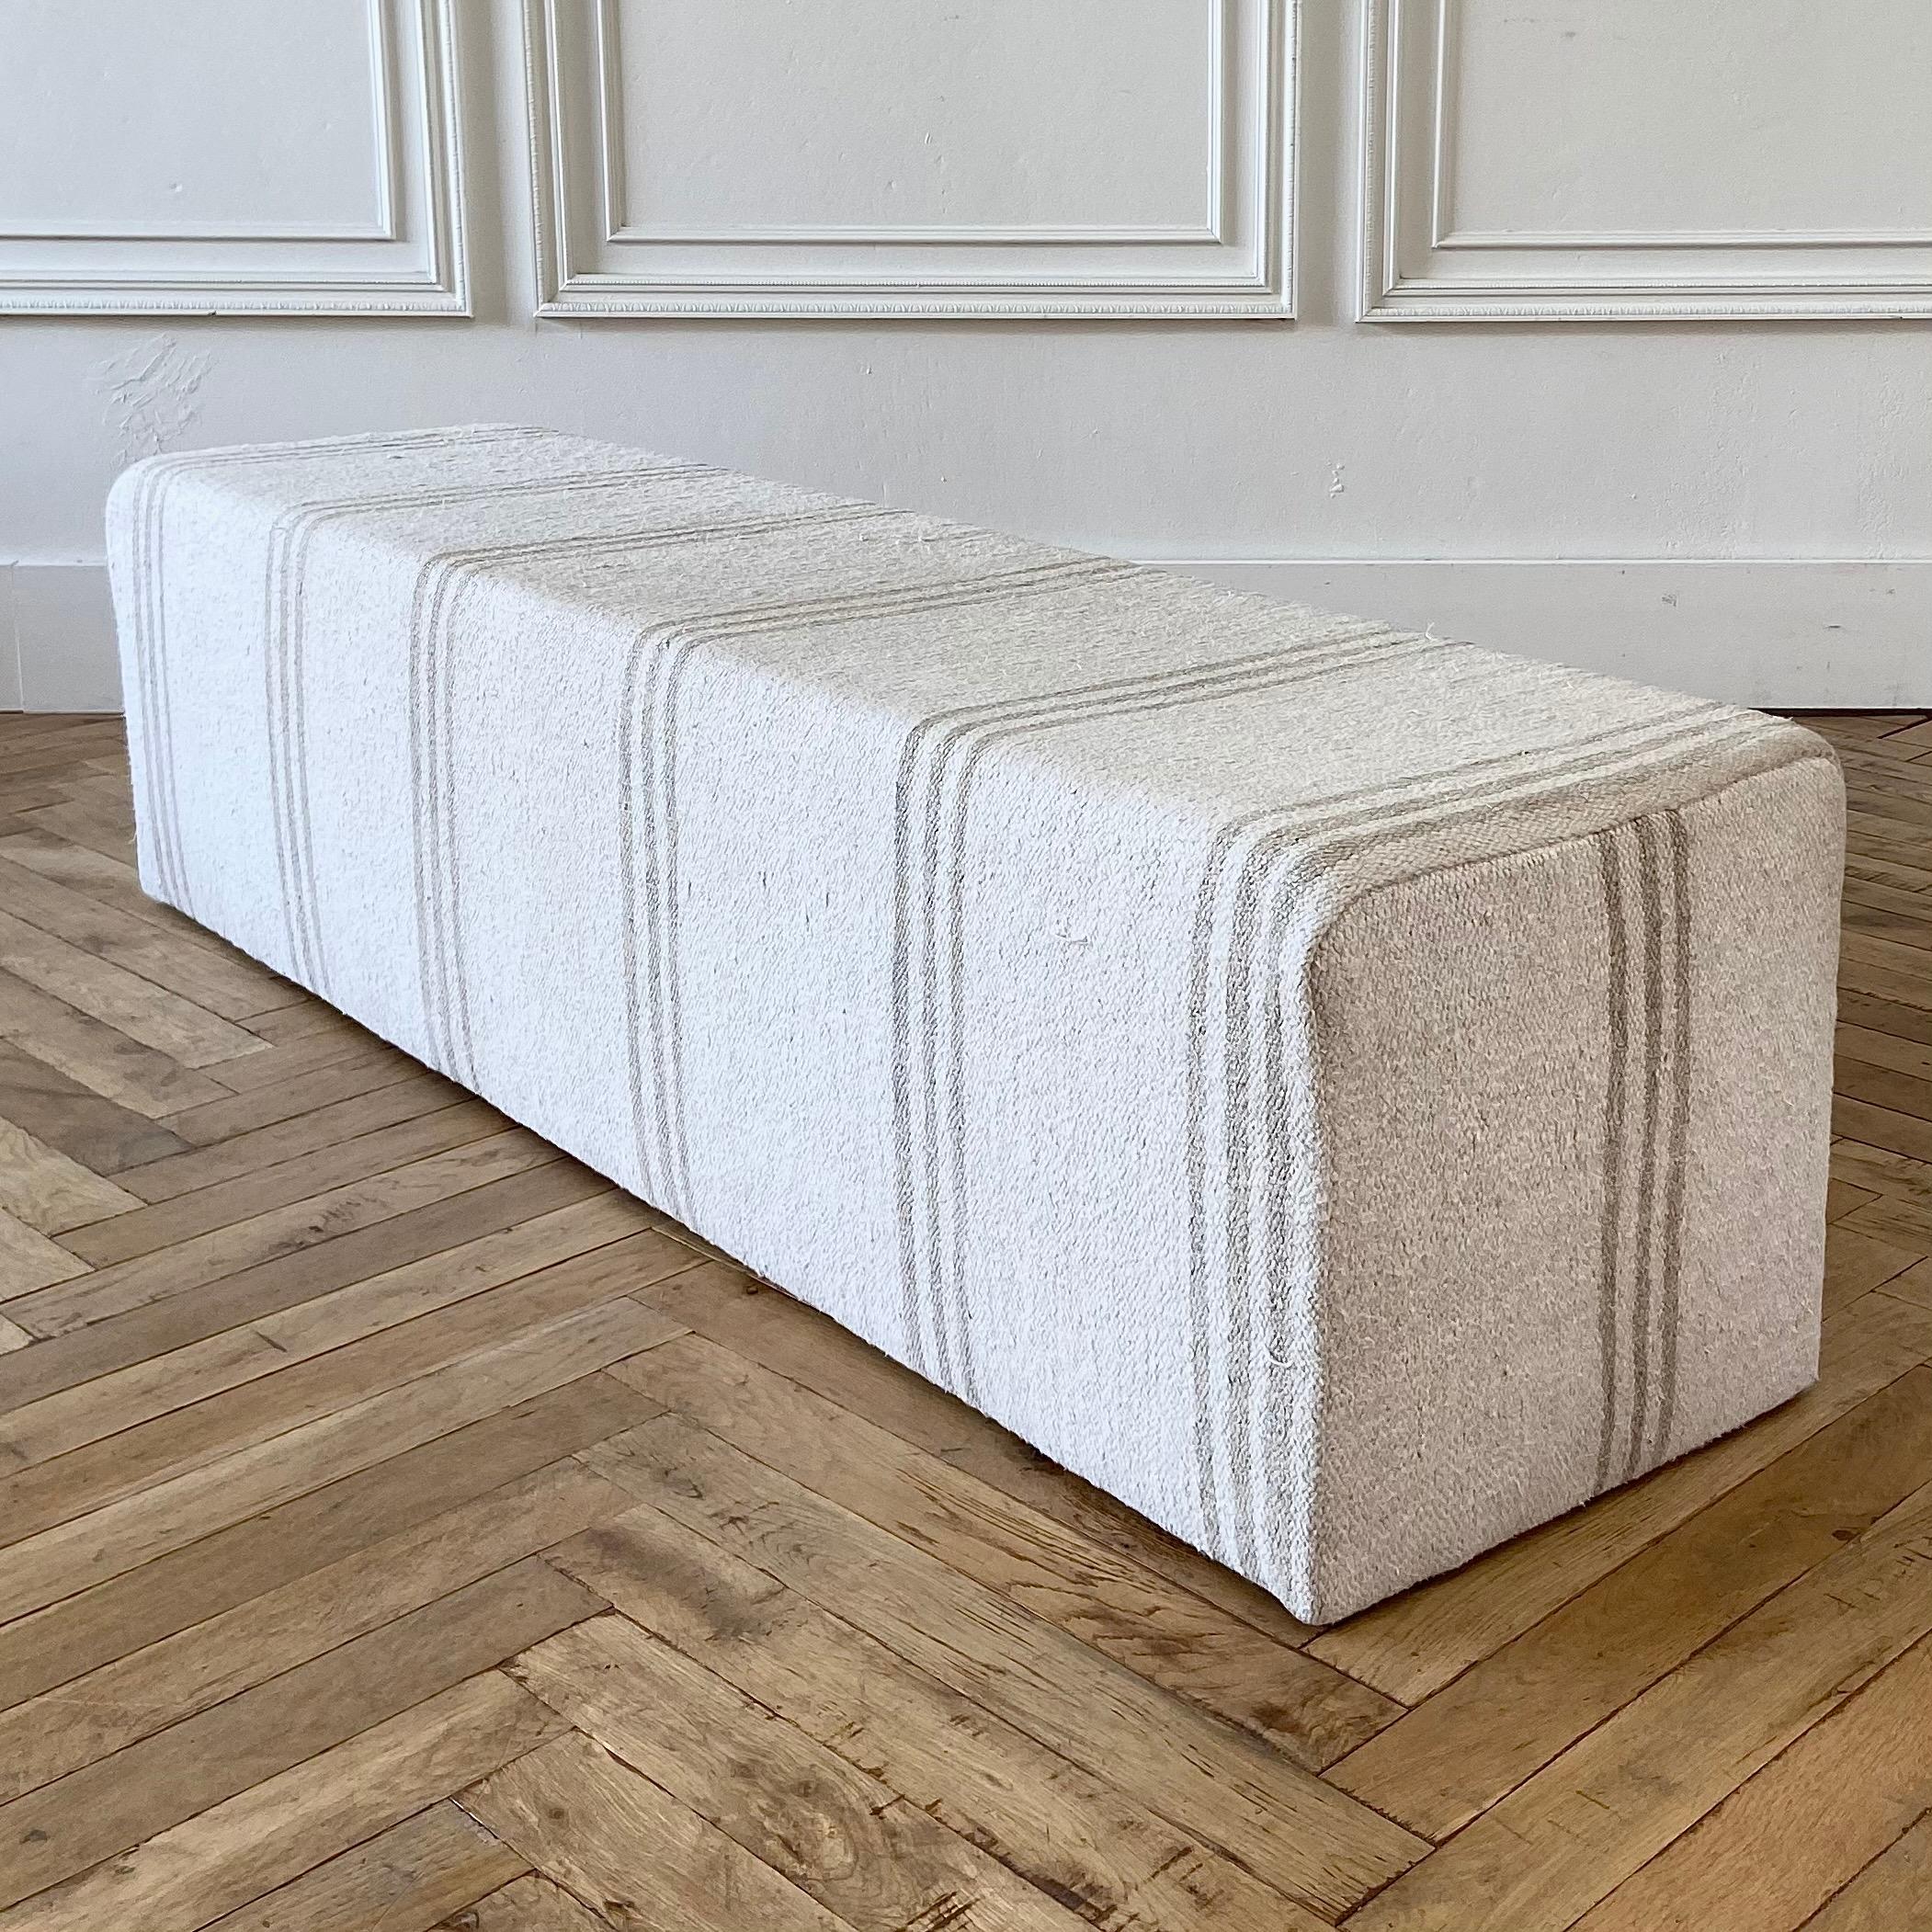 Custom Made Turkish rug Cube style long bench ottoman
A pretty light natural/ off white colored rug with faded taupe gray stripes.
This custom made ottoman bench is perfect as an end of the bed bench, or entry, or living room.
The wood frame